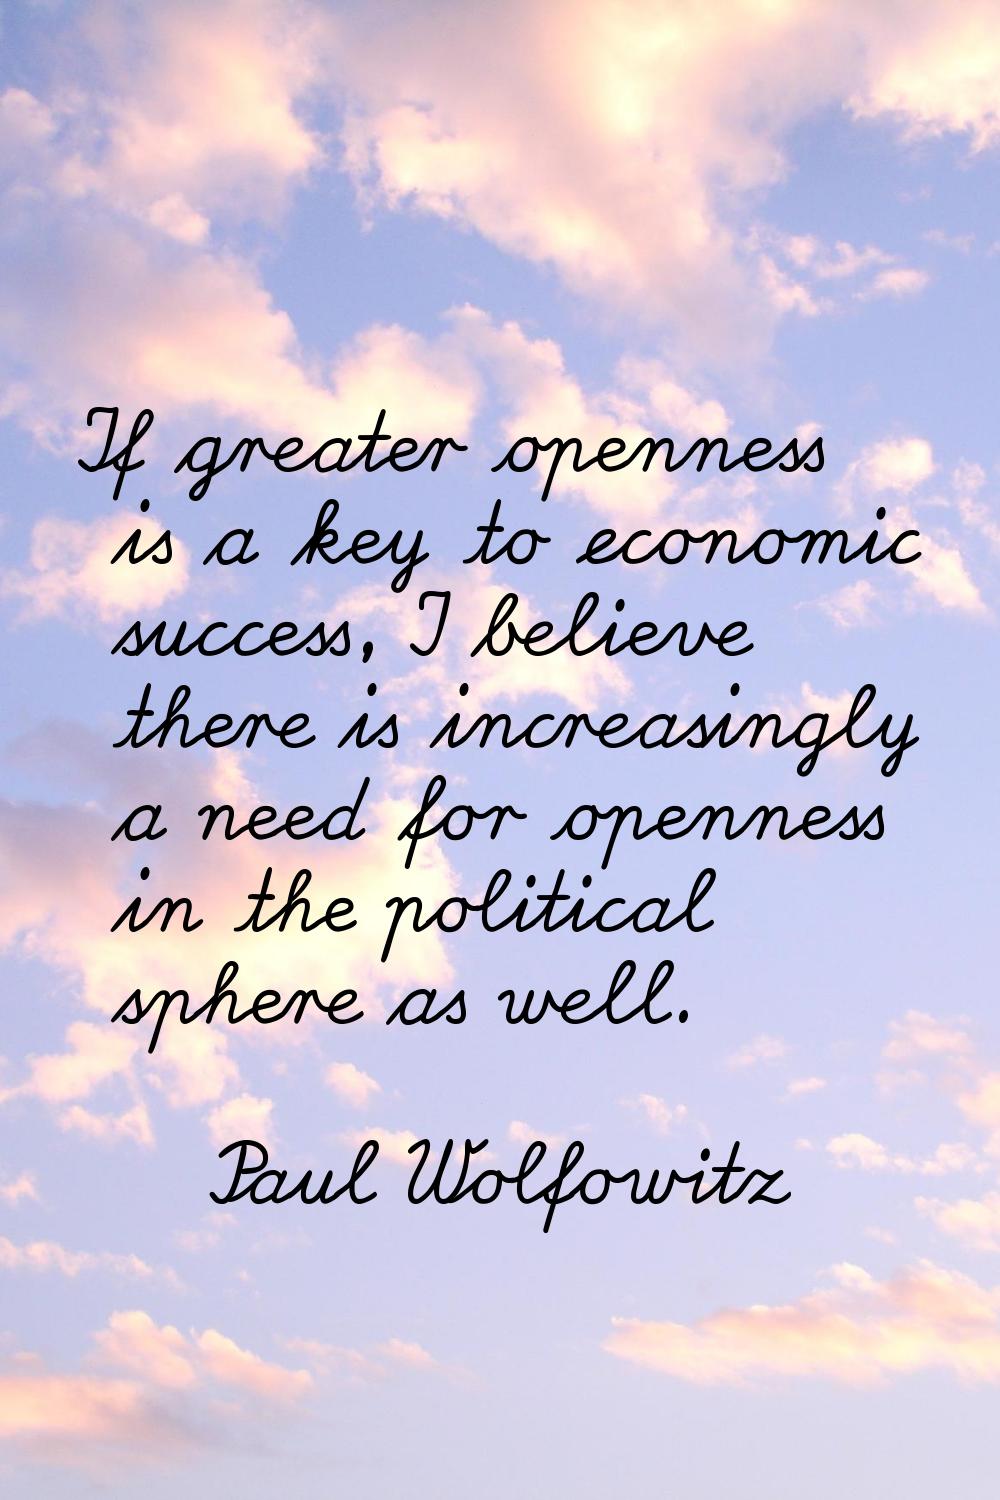 If greater openness is a key to economic success, I believe there is increasingly a need for openne